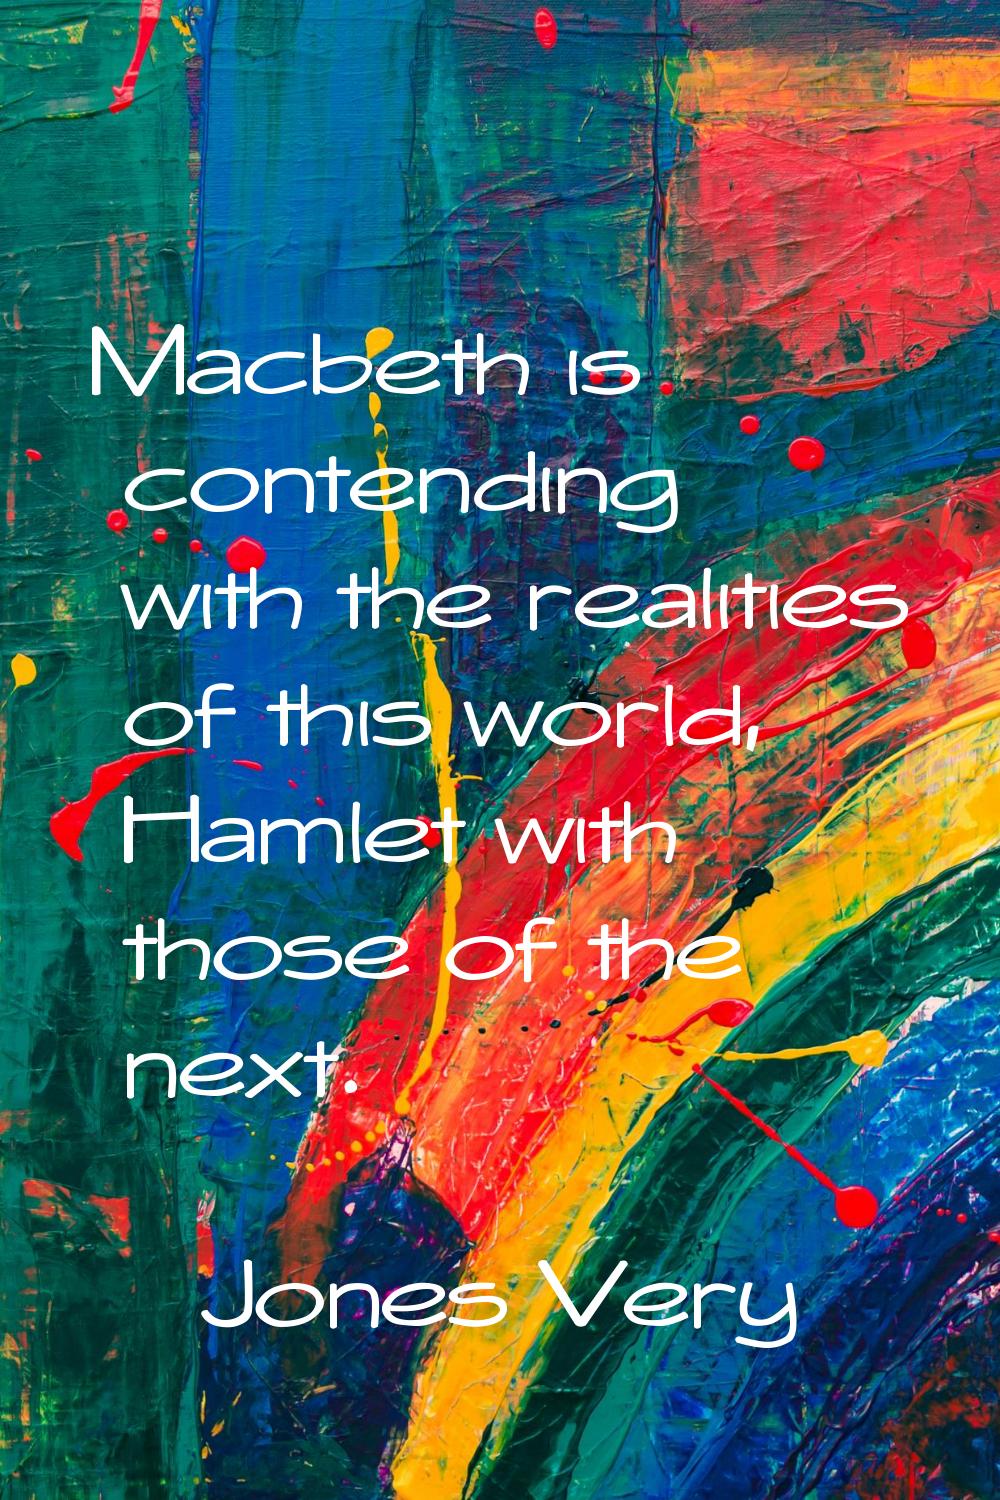 Macbeth is contending with the realities of this world, Hamlet with those of the next.